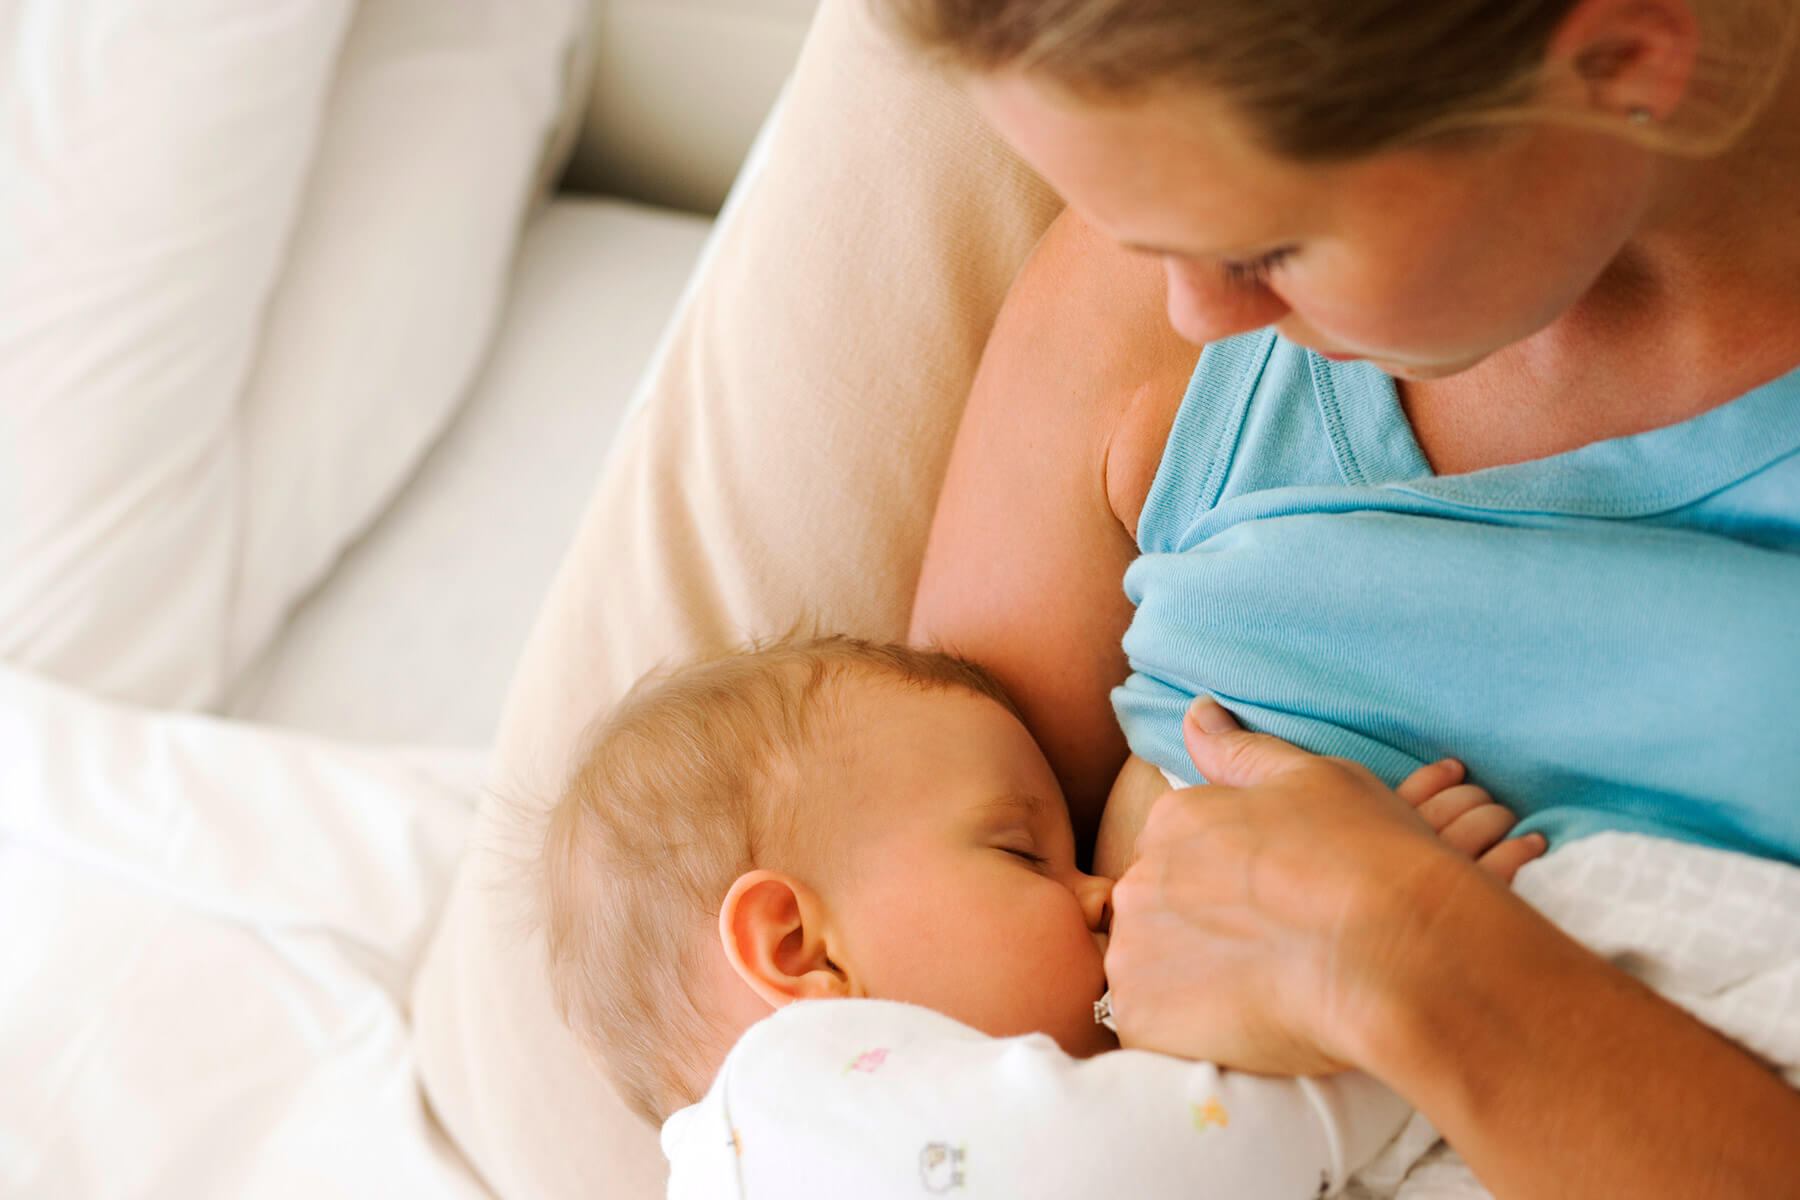 How much time should be breastfeeding given